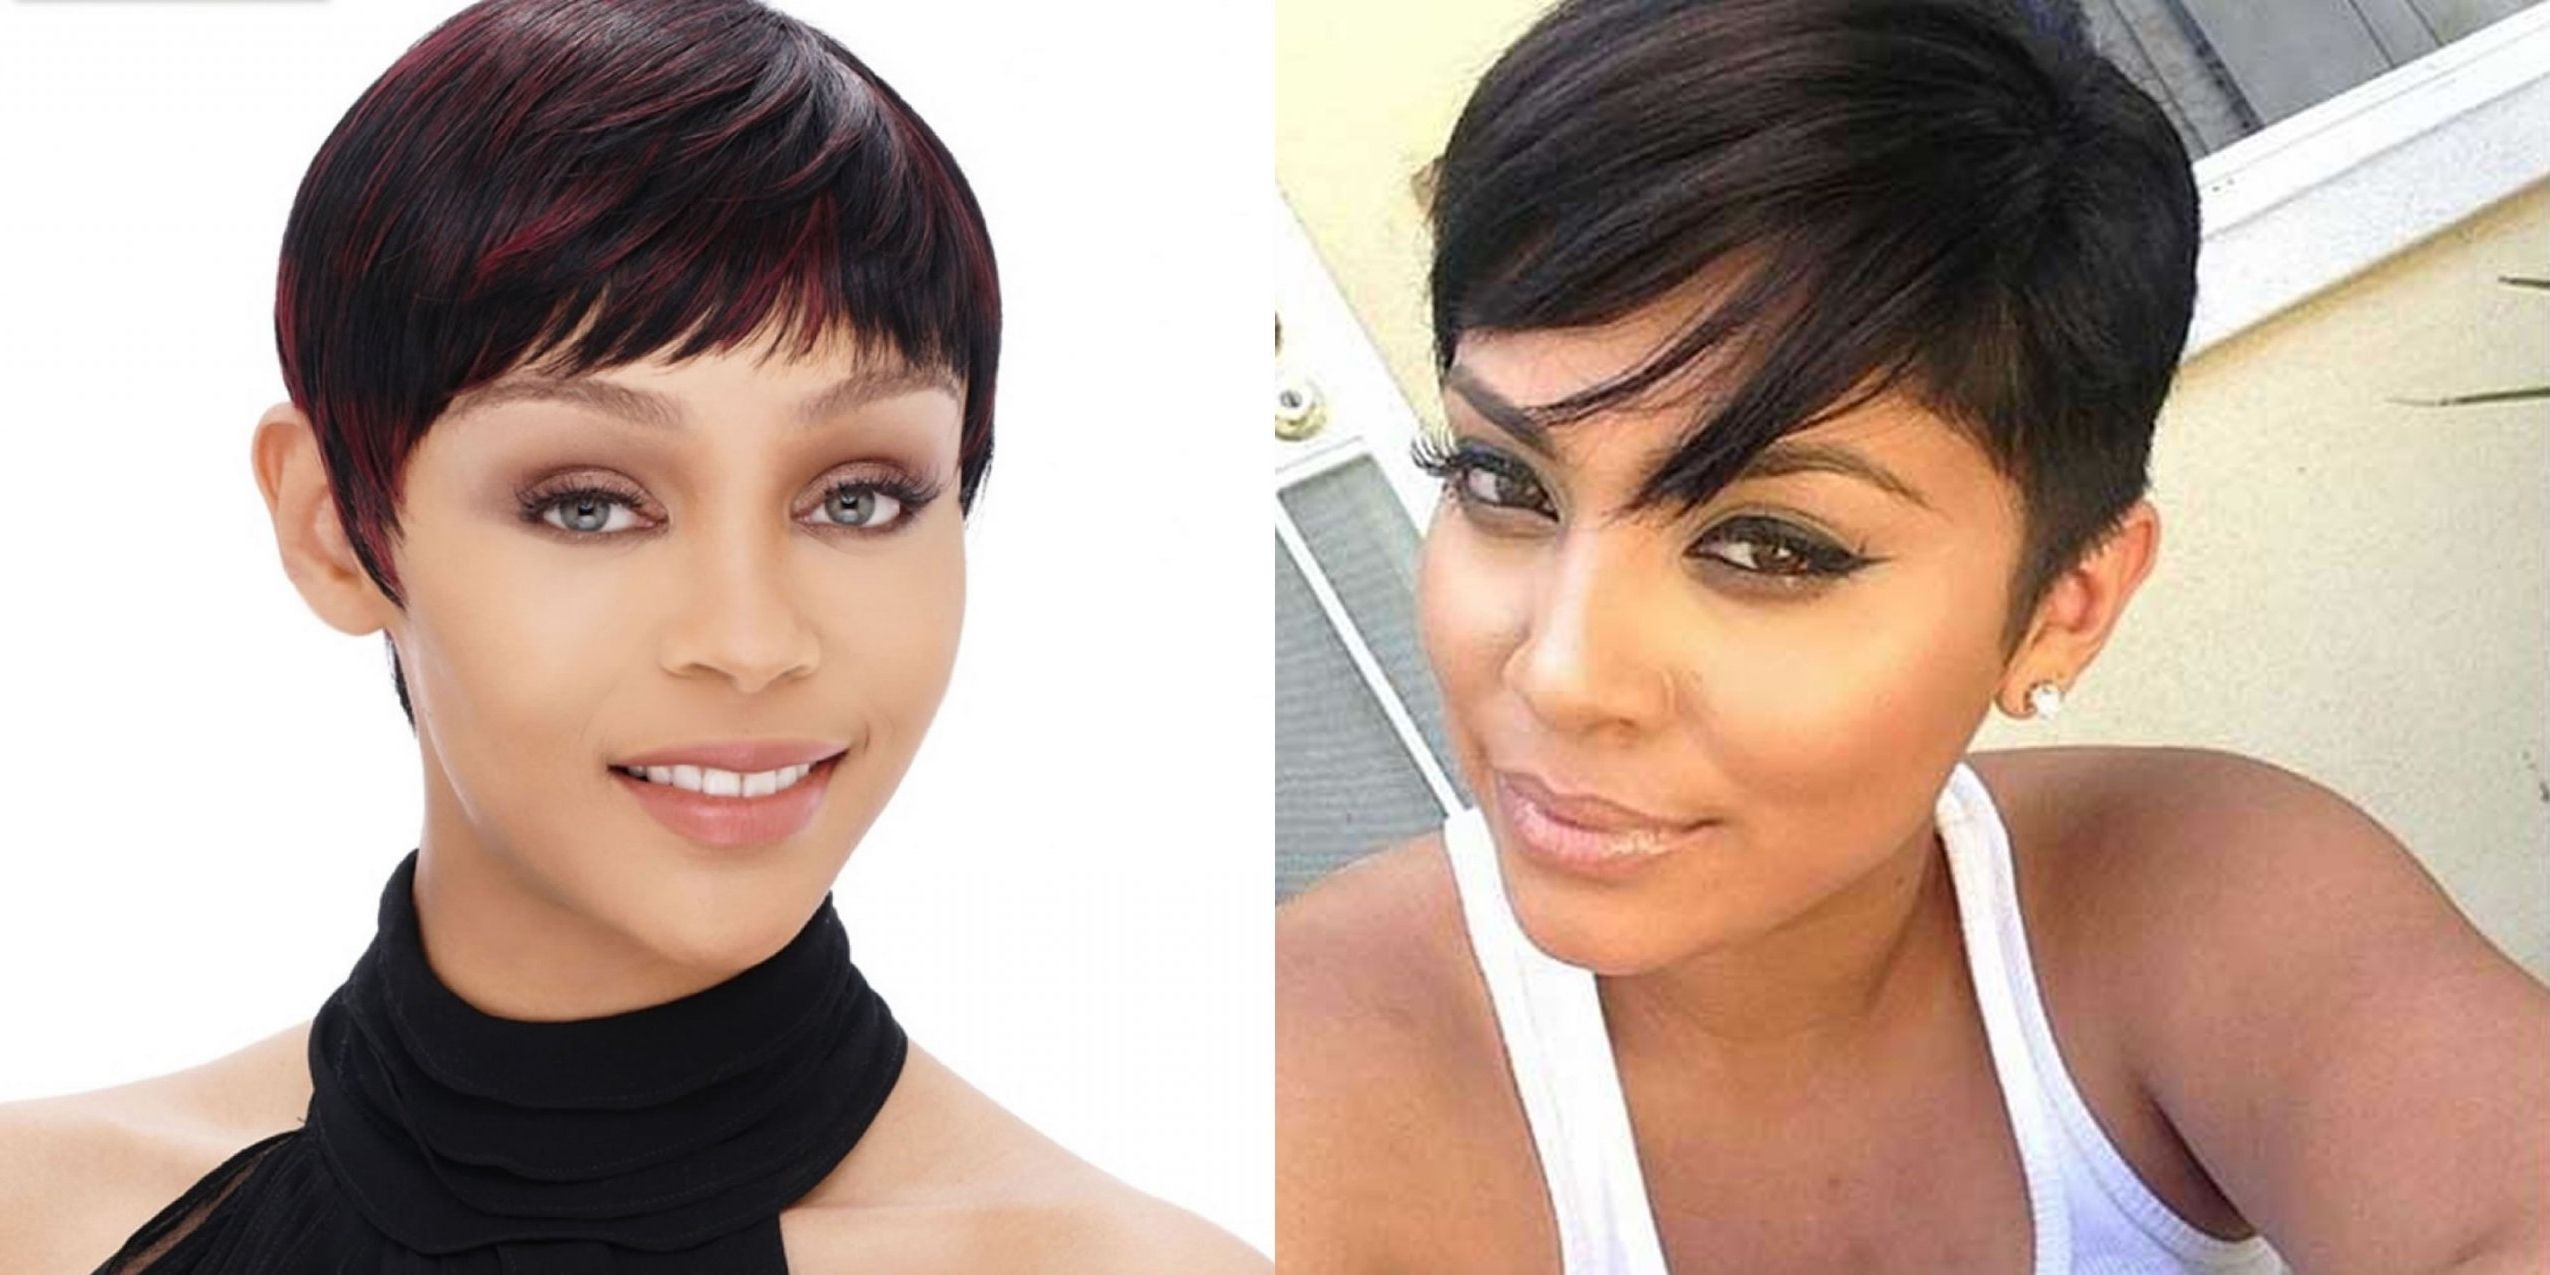 Pixie Hairstyles For Black Women – 60 Cool Short Haircuts For 2017 Inside Latest Short Straight Pixie Hairstyles (View 3 of 15)